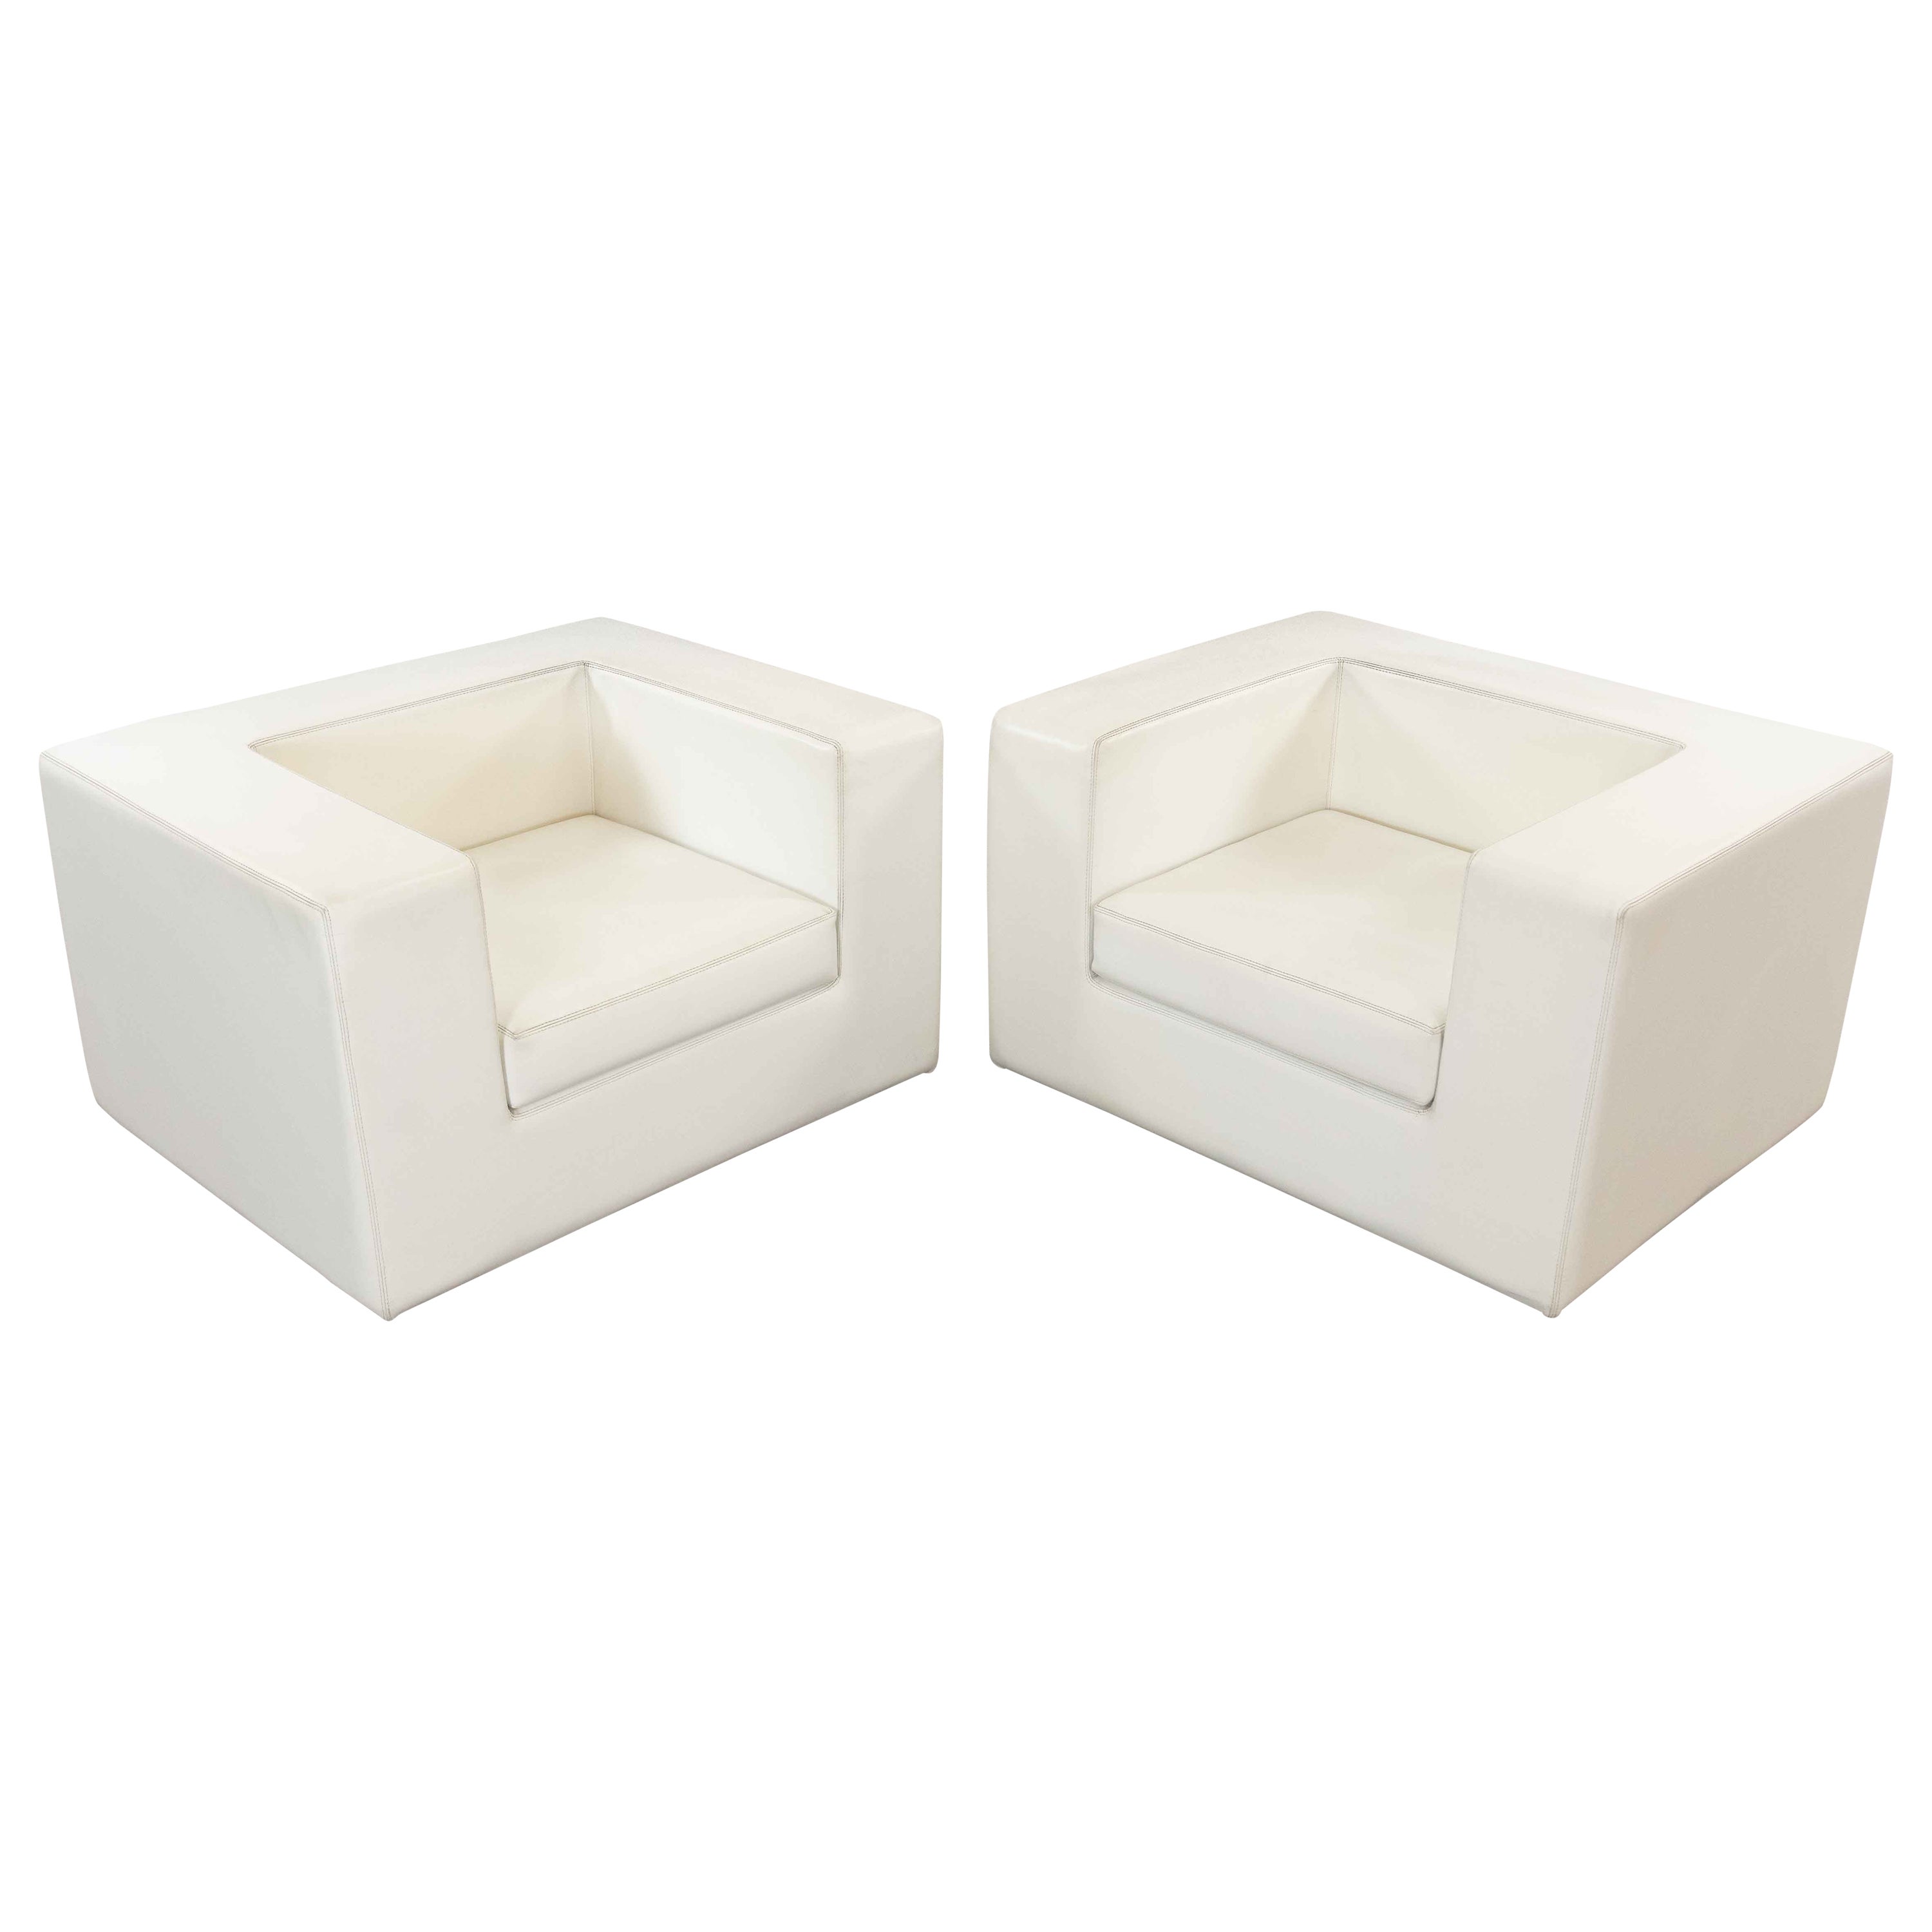 Pair of Vintage Throw Away Armchairs by Willie Landels for Zanotta, White Vinyl